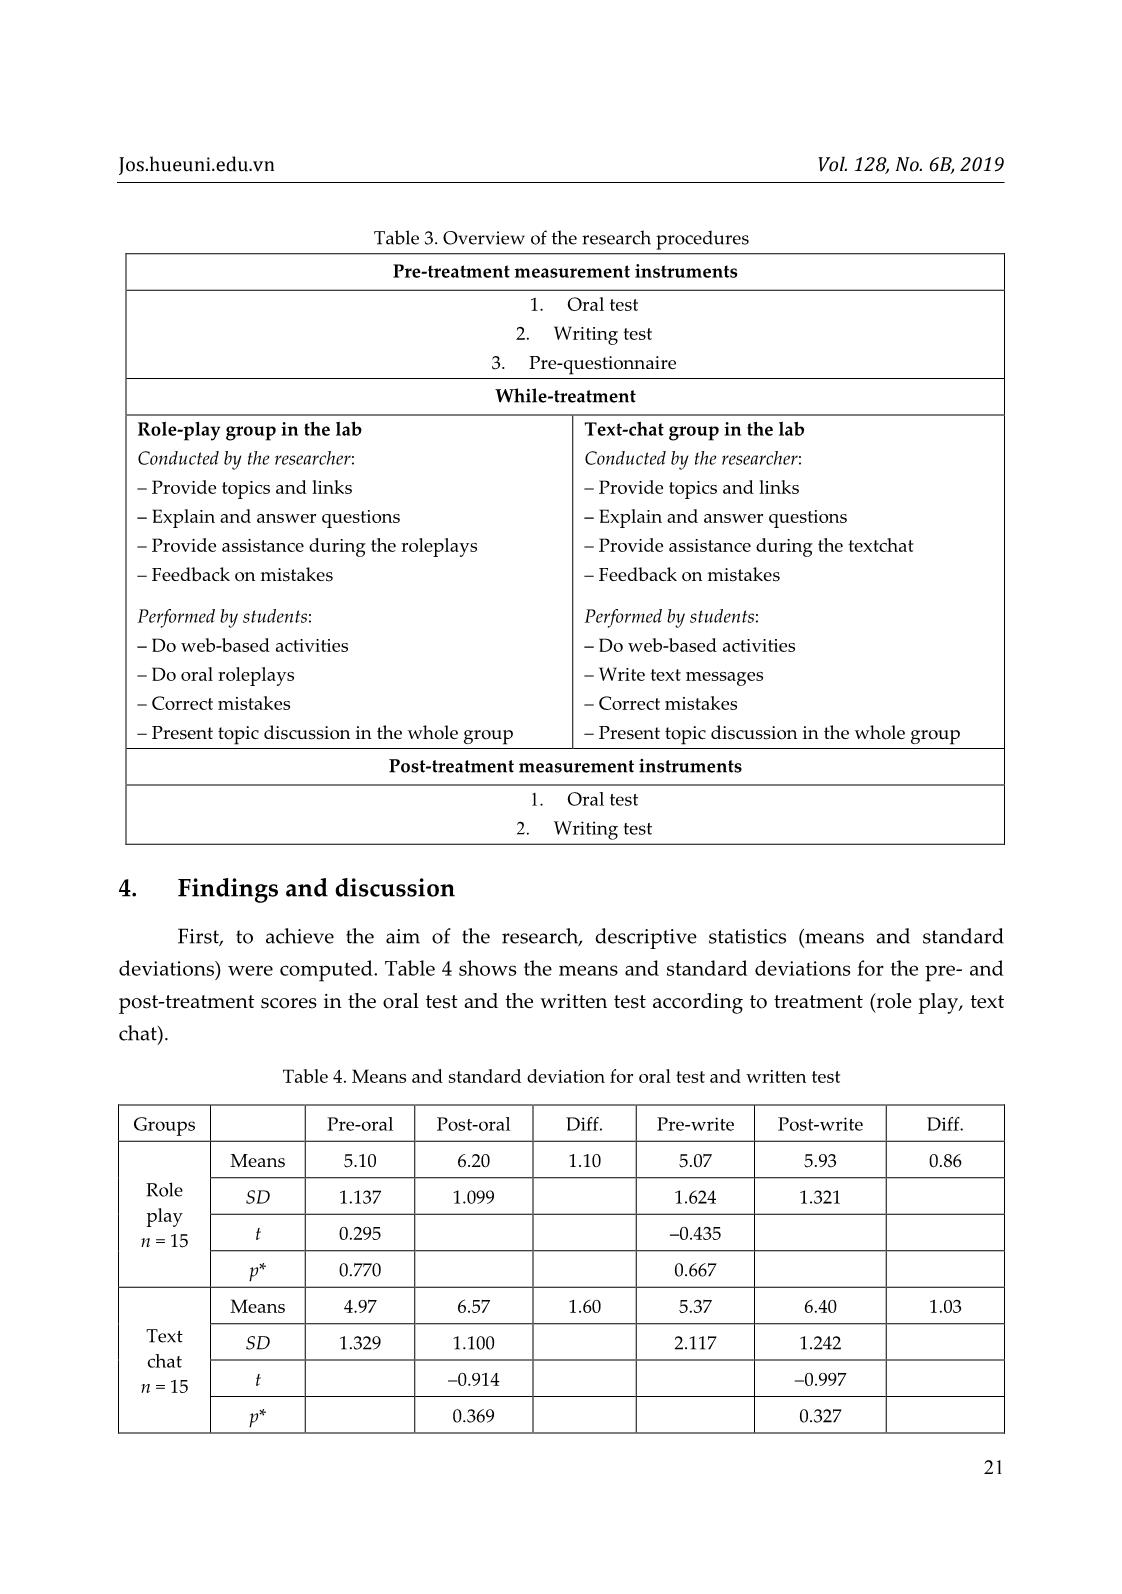 Quantitative analysis of the effect of synchronous online discussions on oral and written language development for efl university students in Vietnam trang 6